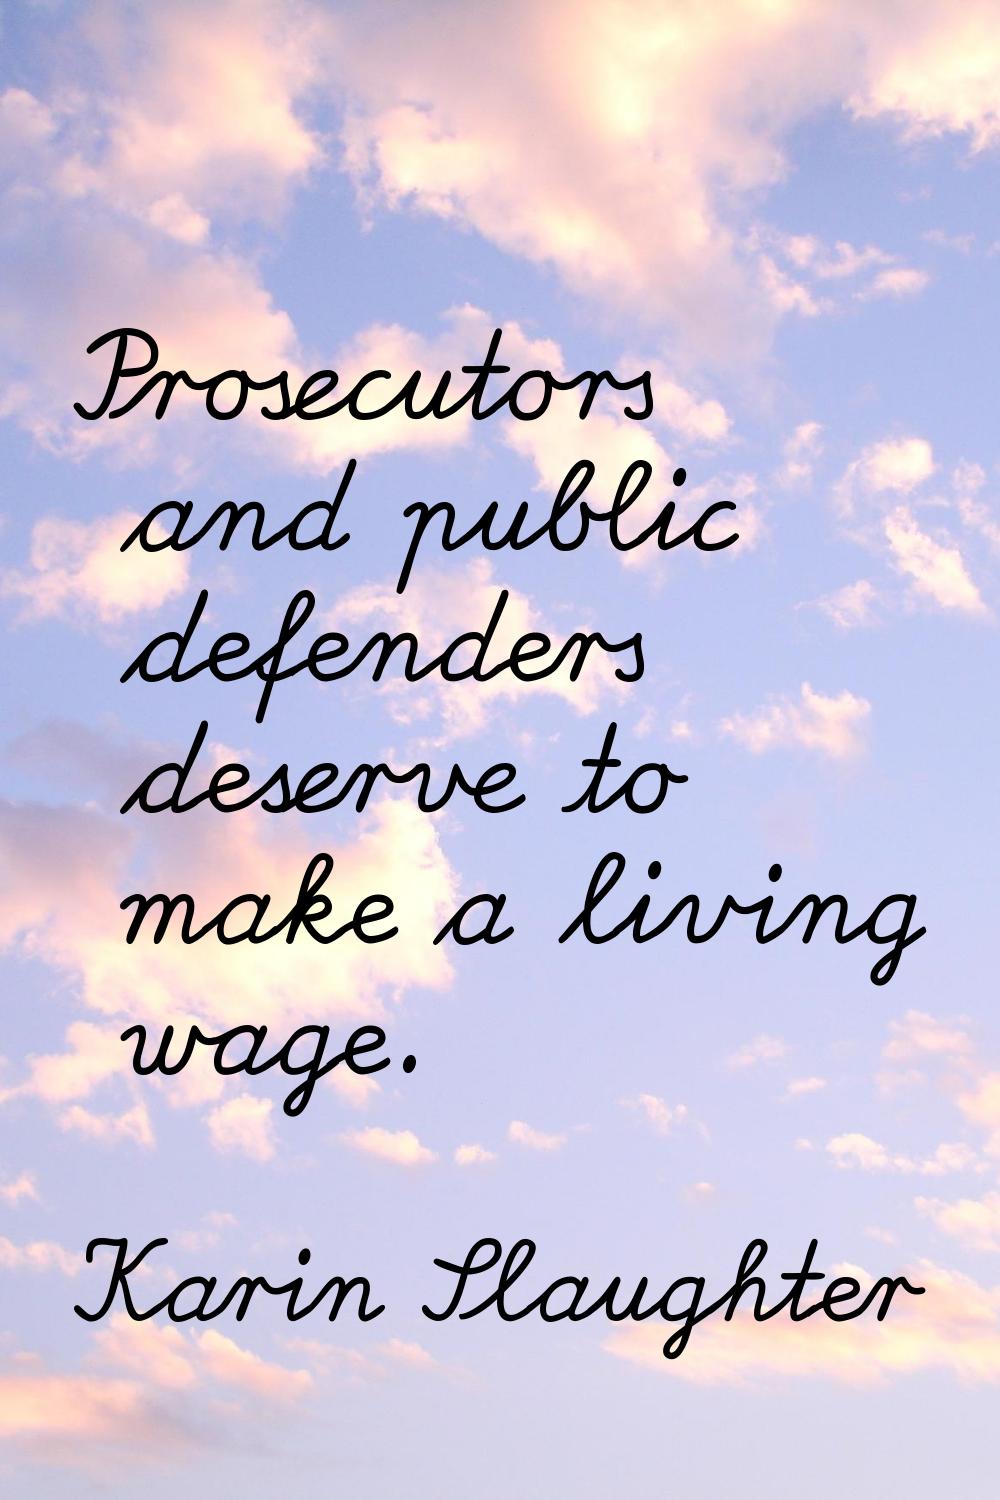 Prosecutors and public defenders deserve to make a living wage.